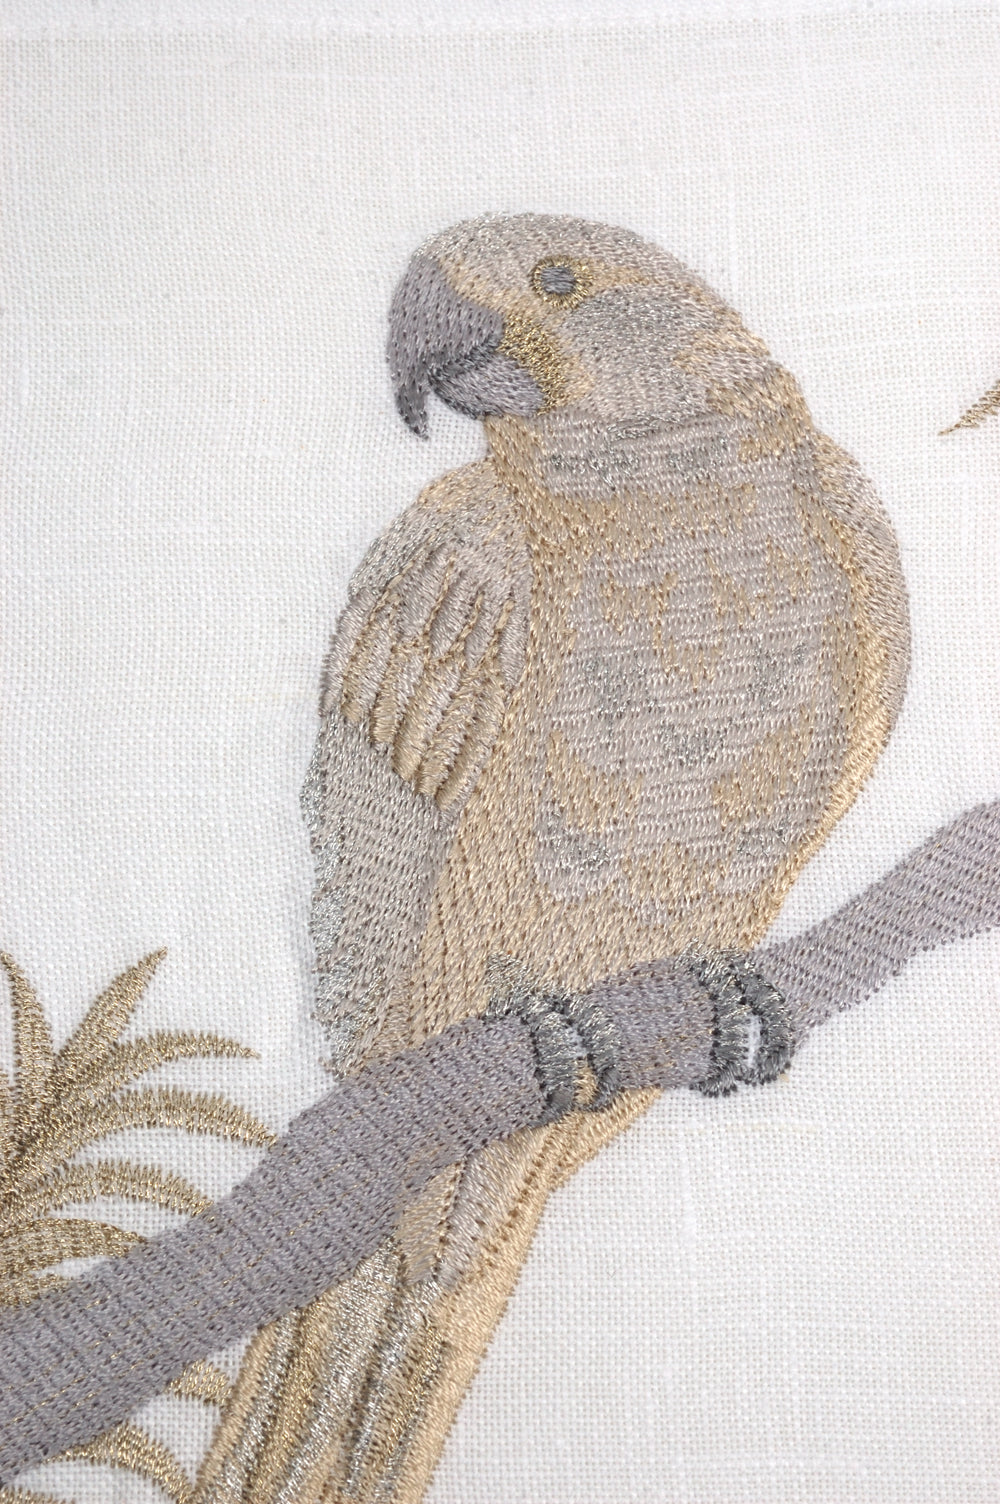 the-gold-parrot-fine-linen-embroidery-placemat-made-in-italy